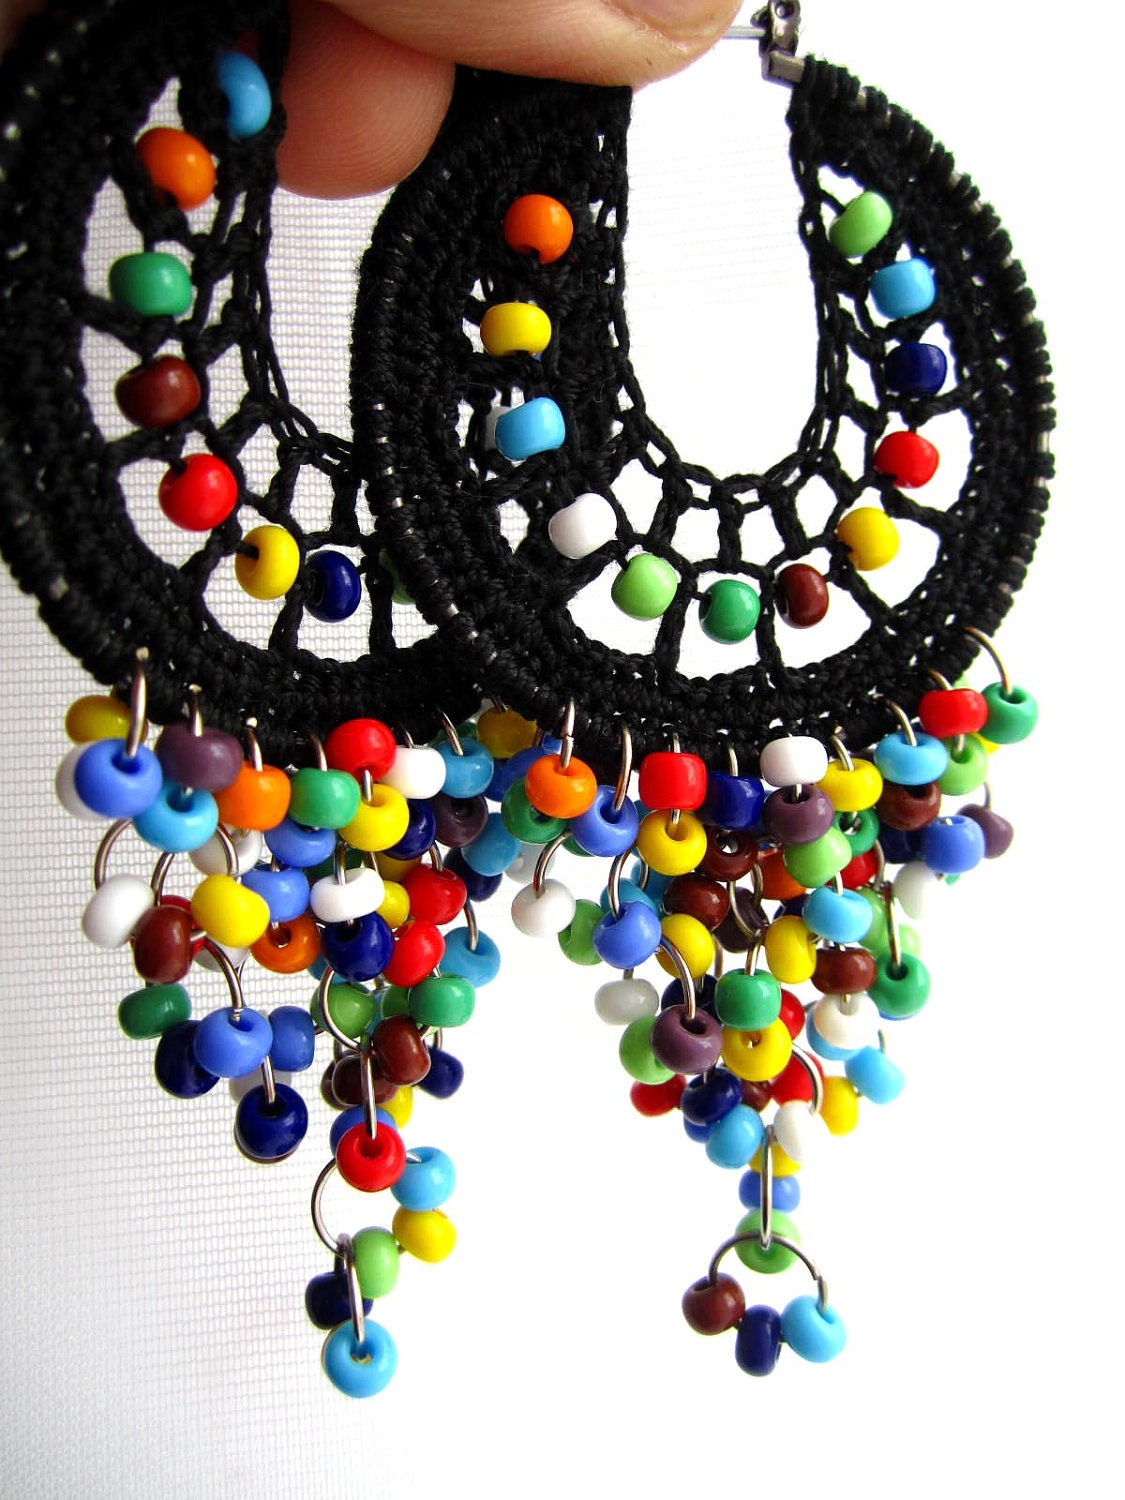 Lolita Crocheted hoops with beads